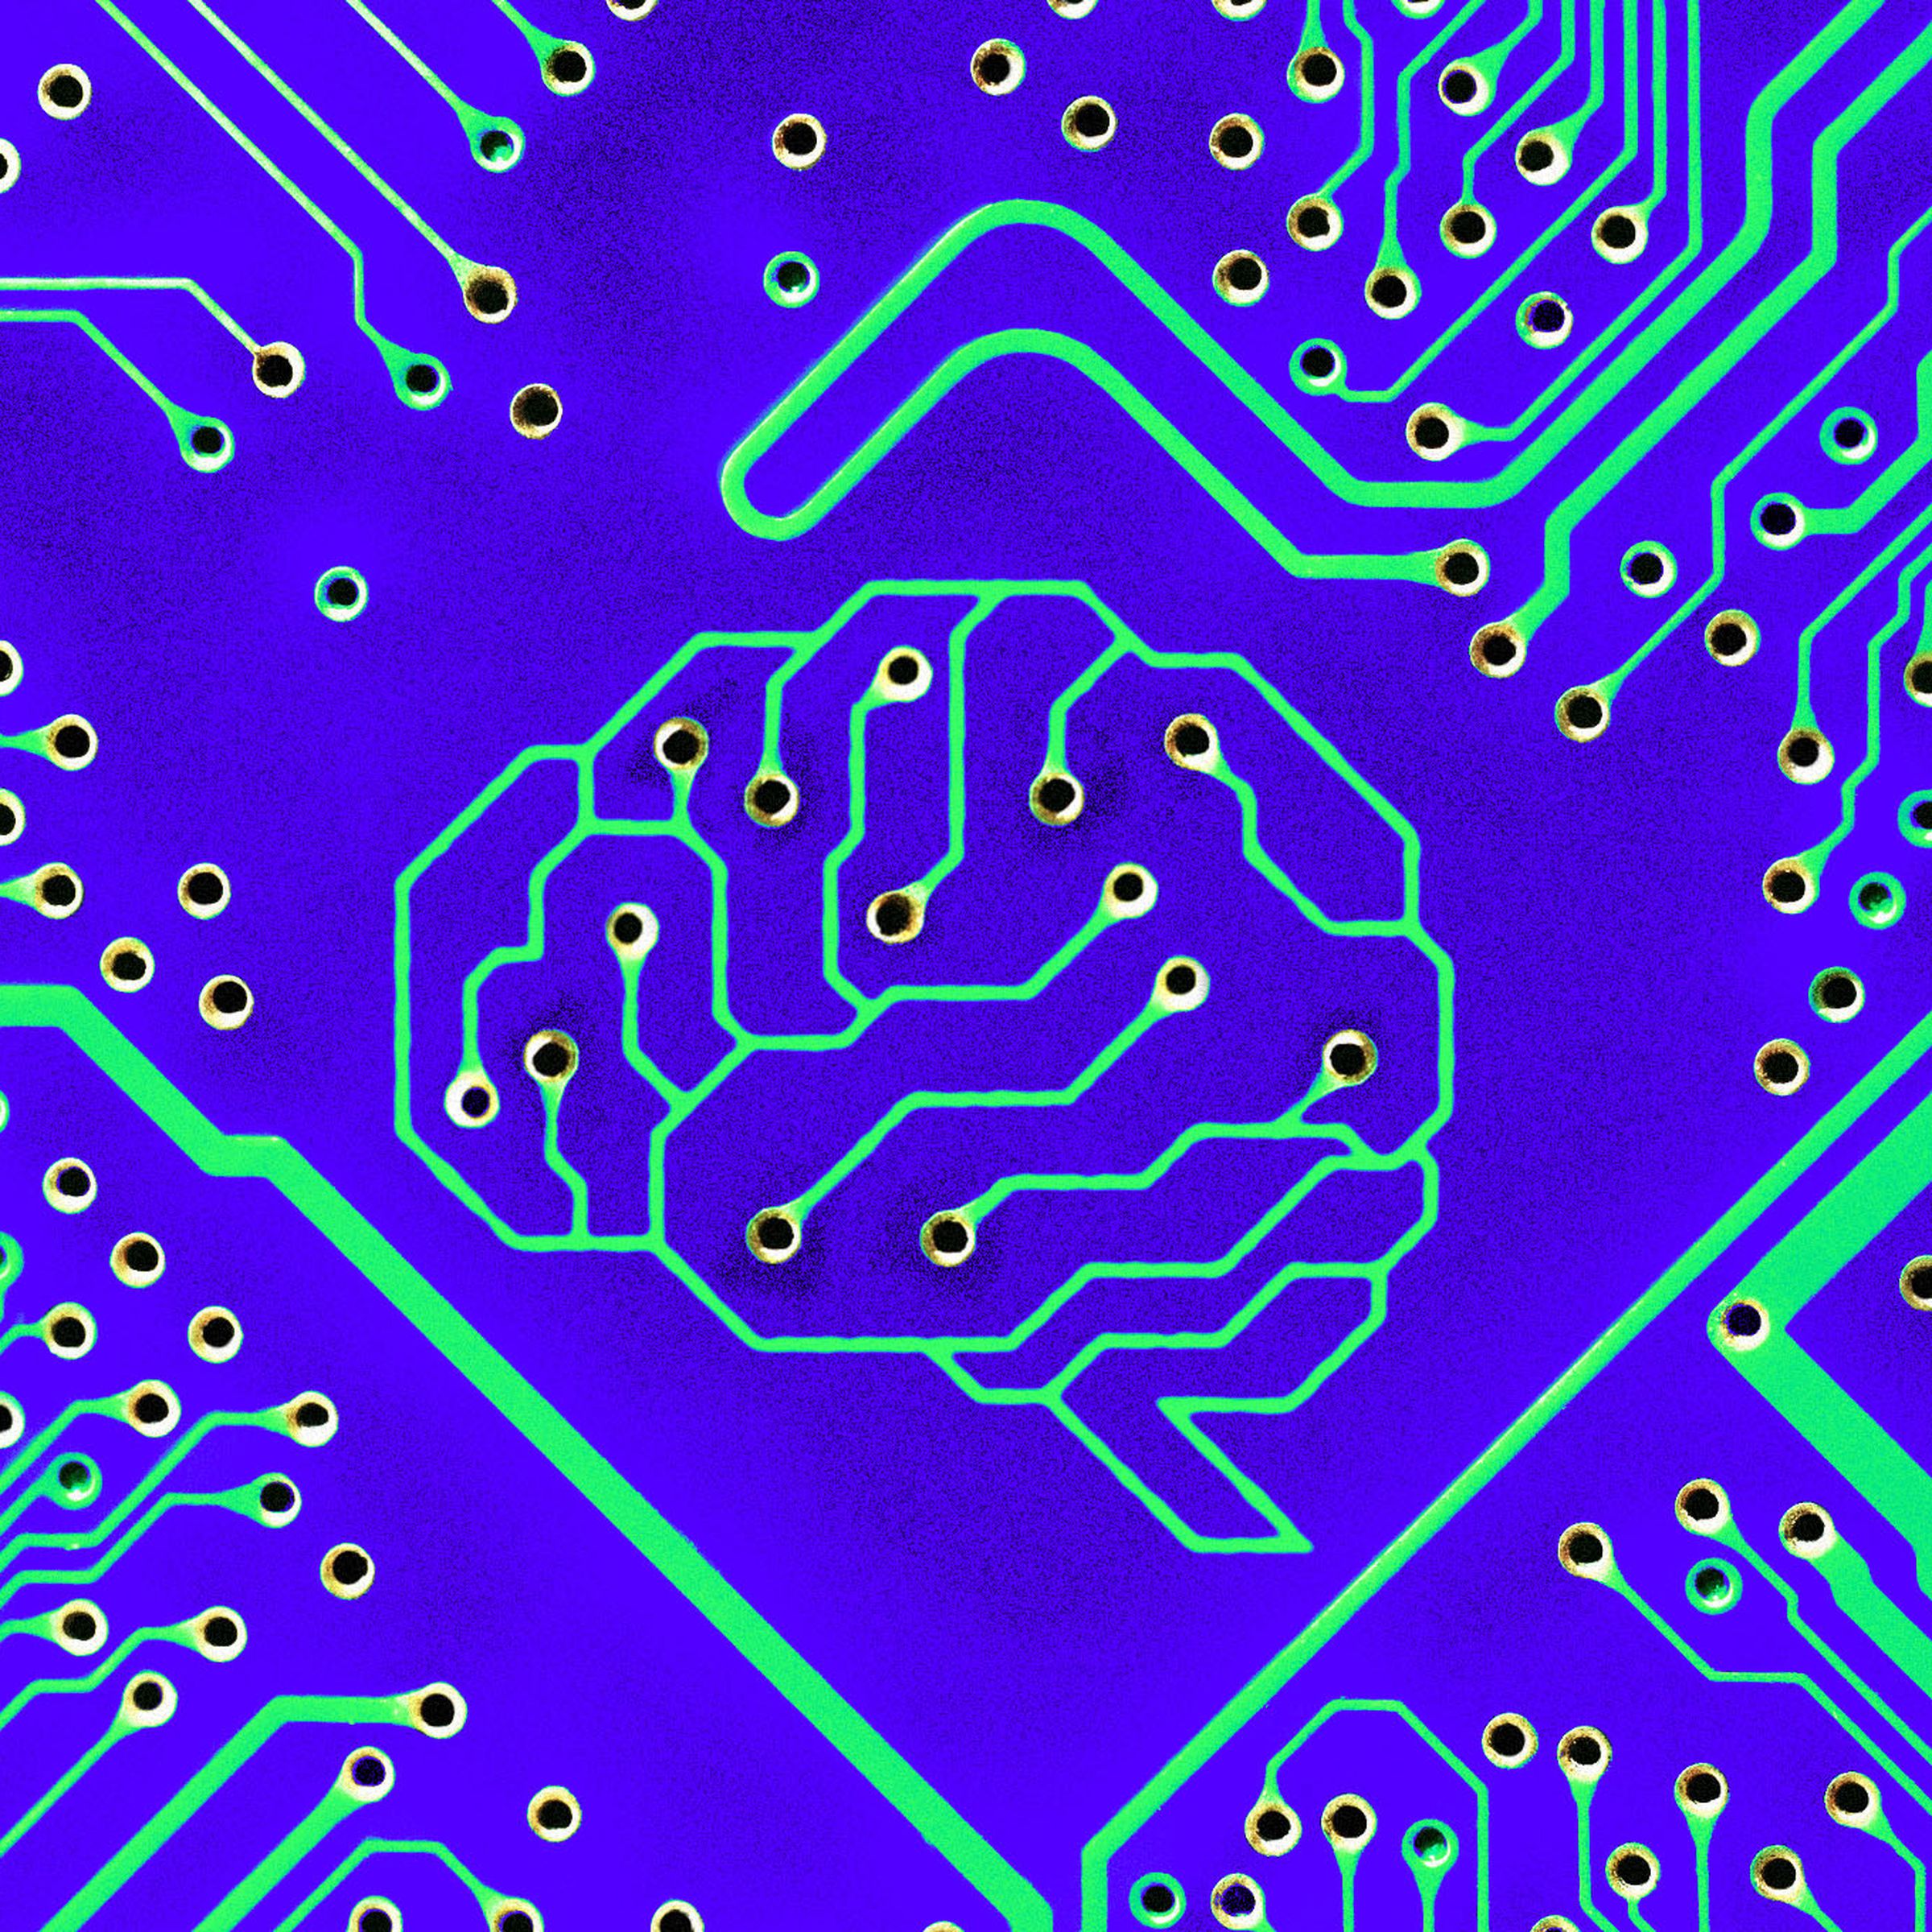 Photo illustration of the shape of a brain on a circuitboard.